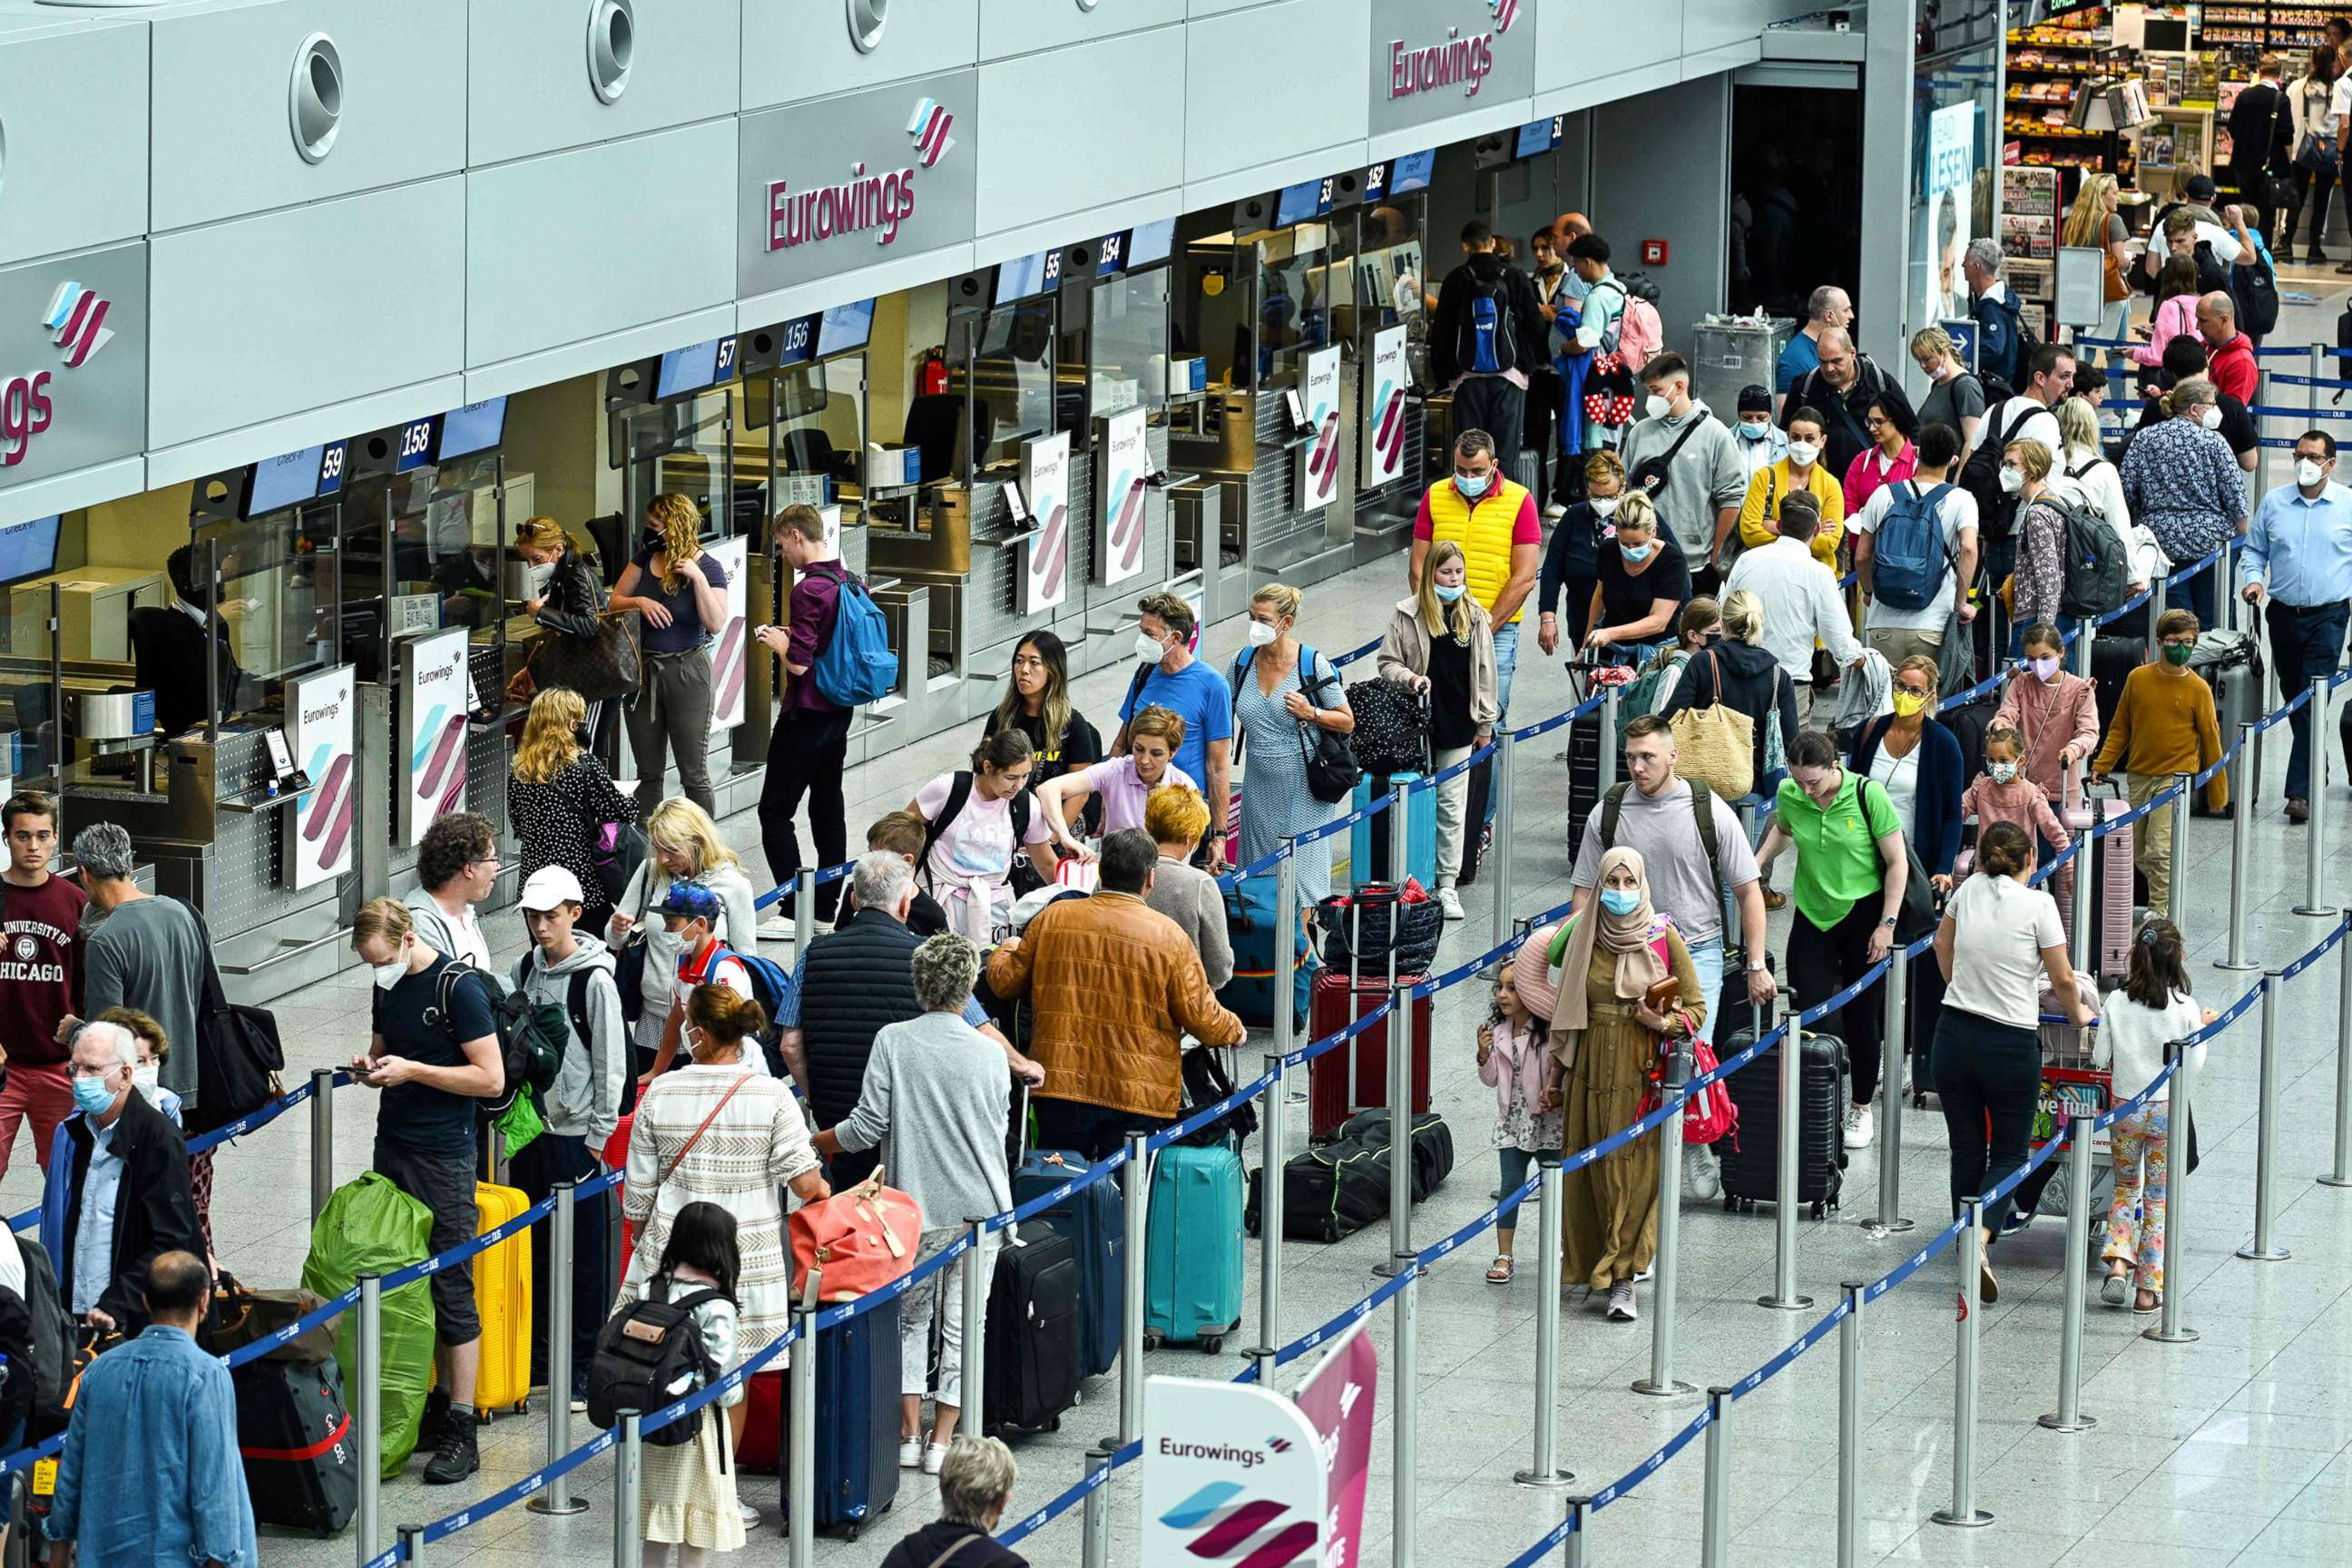 PHOTO: Passengers queue at the check-in counter of airline Eurowings, a subsidiary of the Lufthansa Group, at Duesseldorf International Airport (DUS), western Germany, on July 1, 2022.